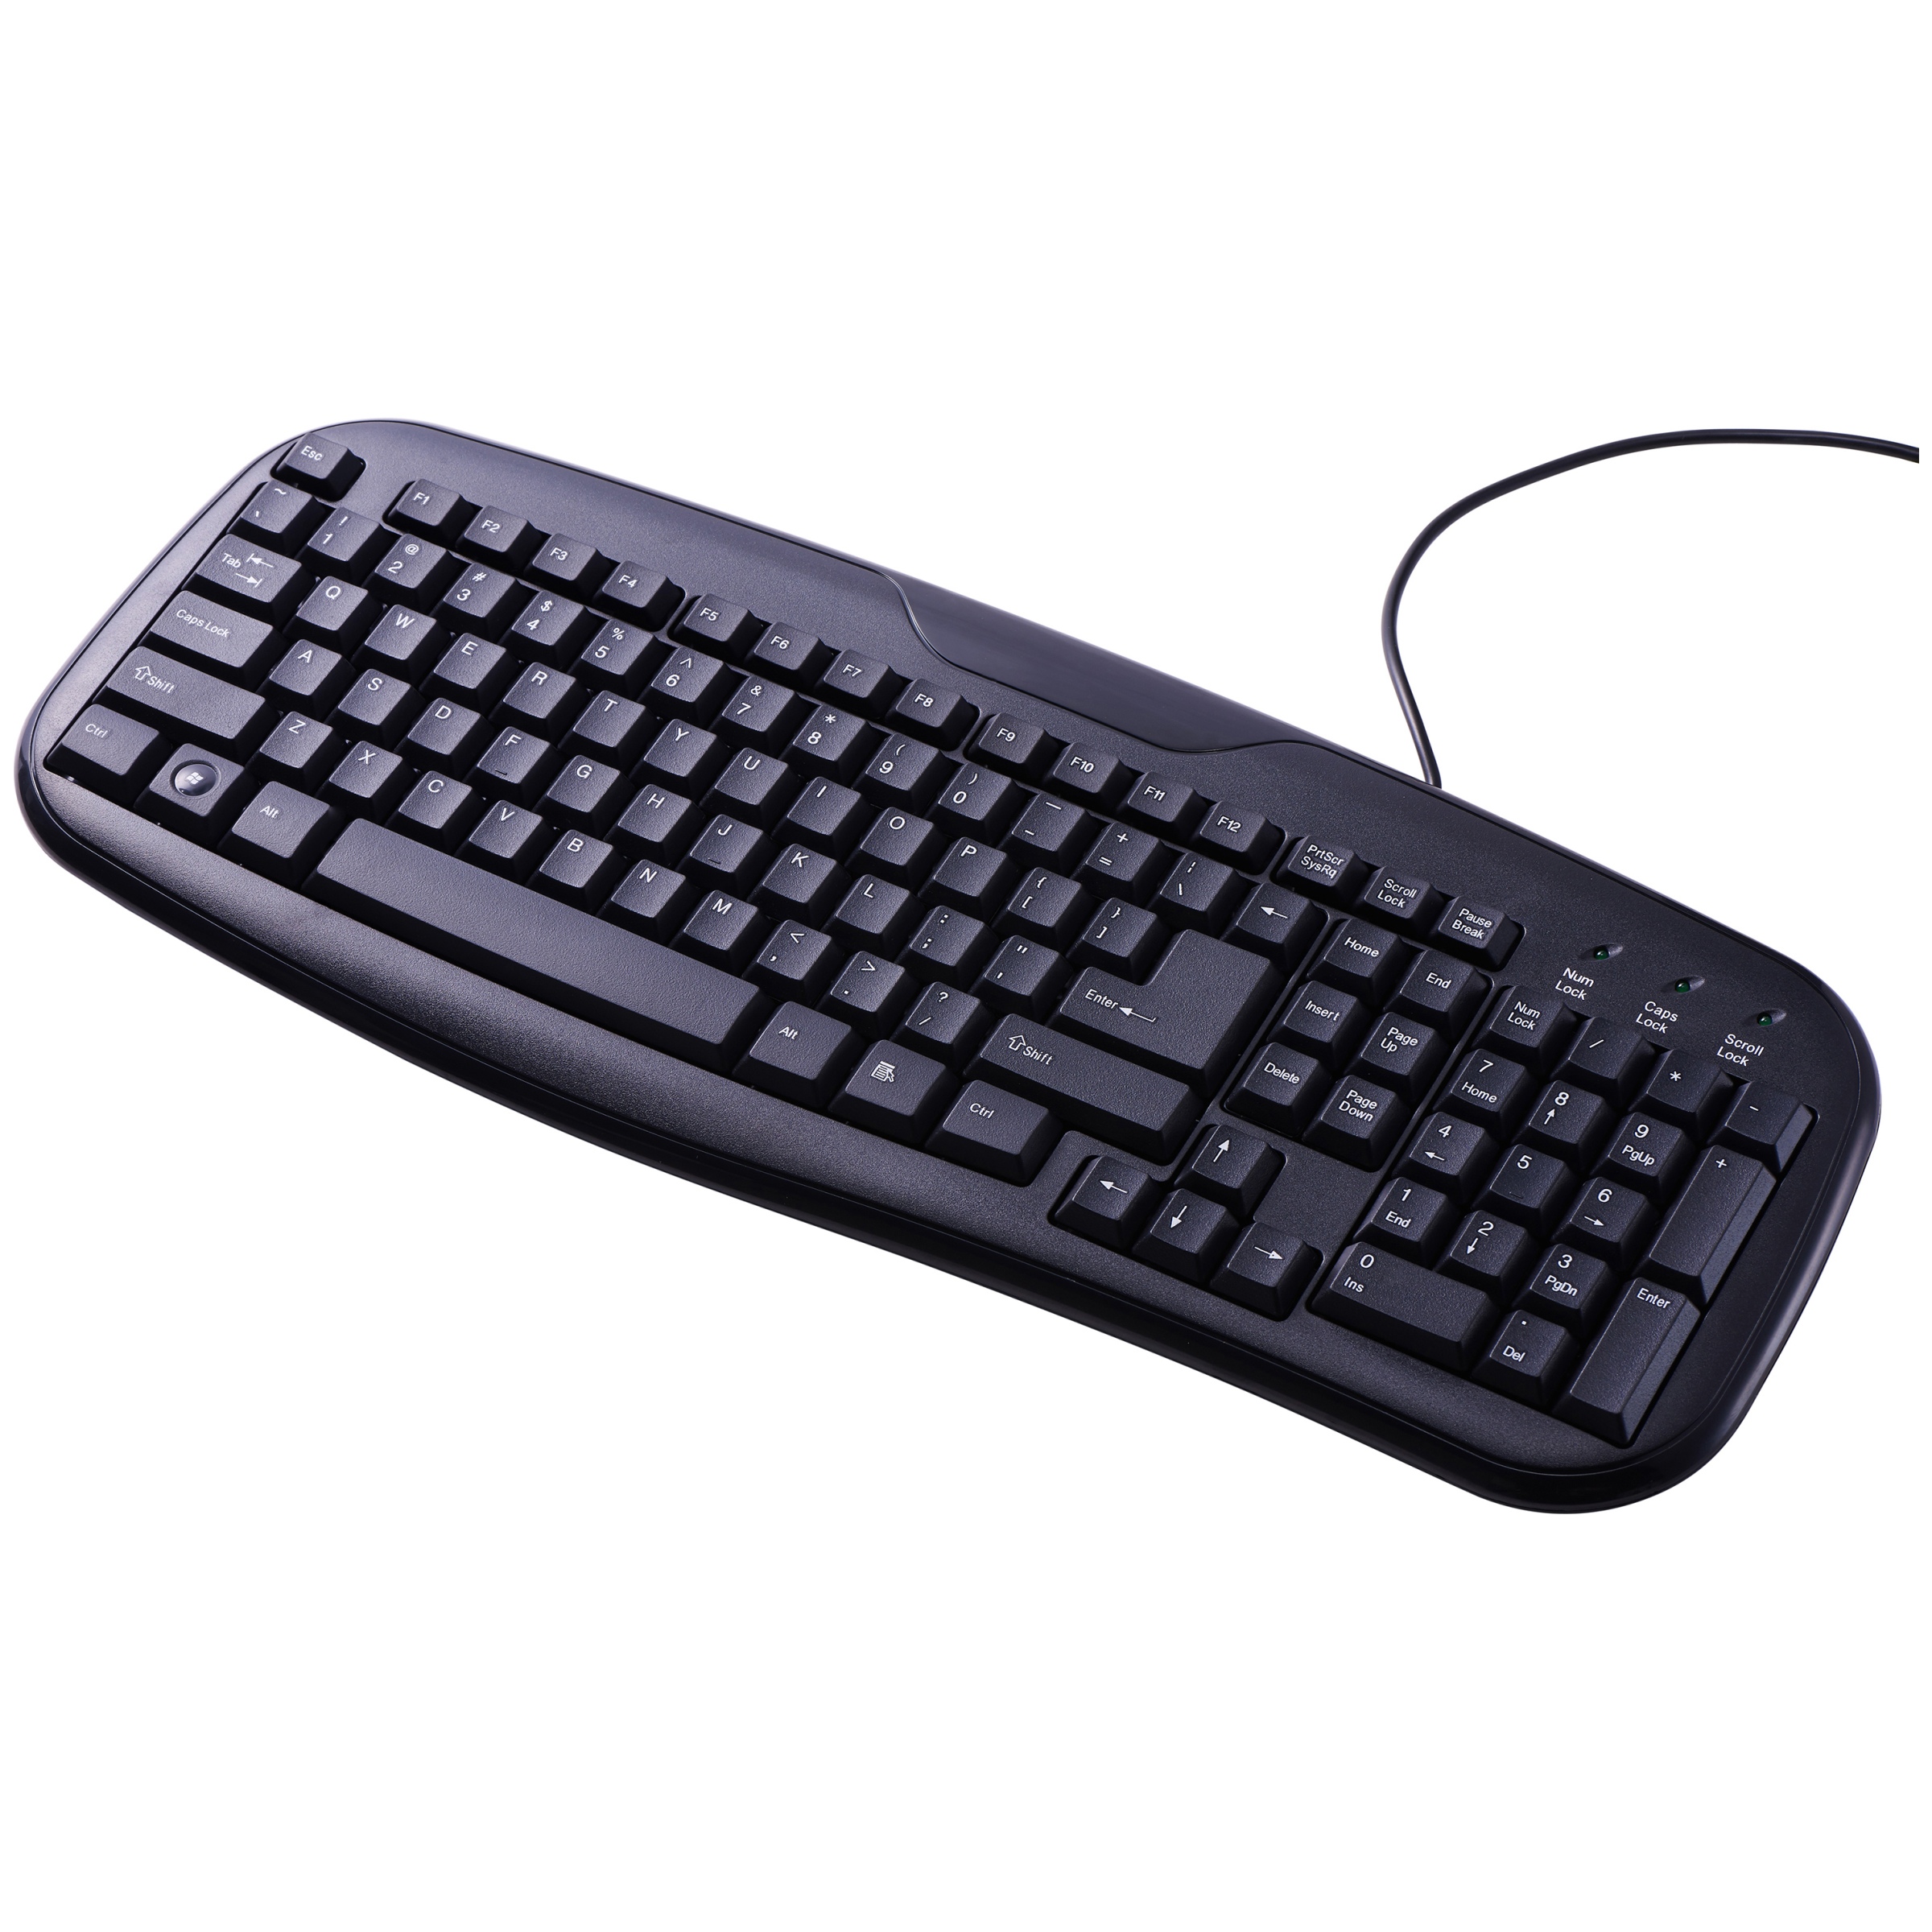 Onn Usb Connected Soft-Touch Wired Keyboard, Black - image 1 of 4